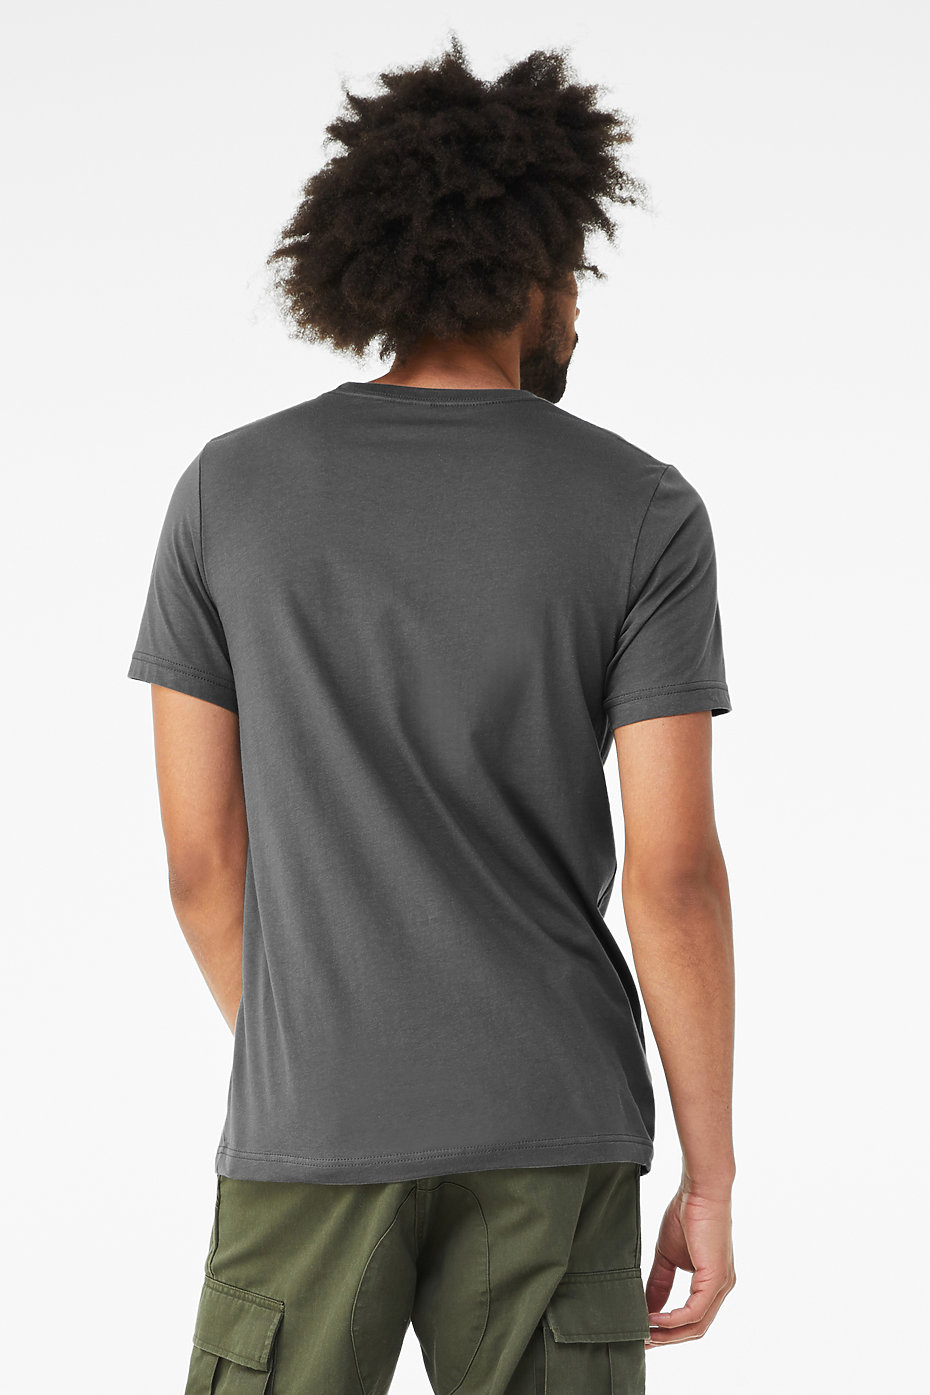 What is a Tri-blend shirt? What Are the Best Tri-blend Shirts for You?